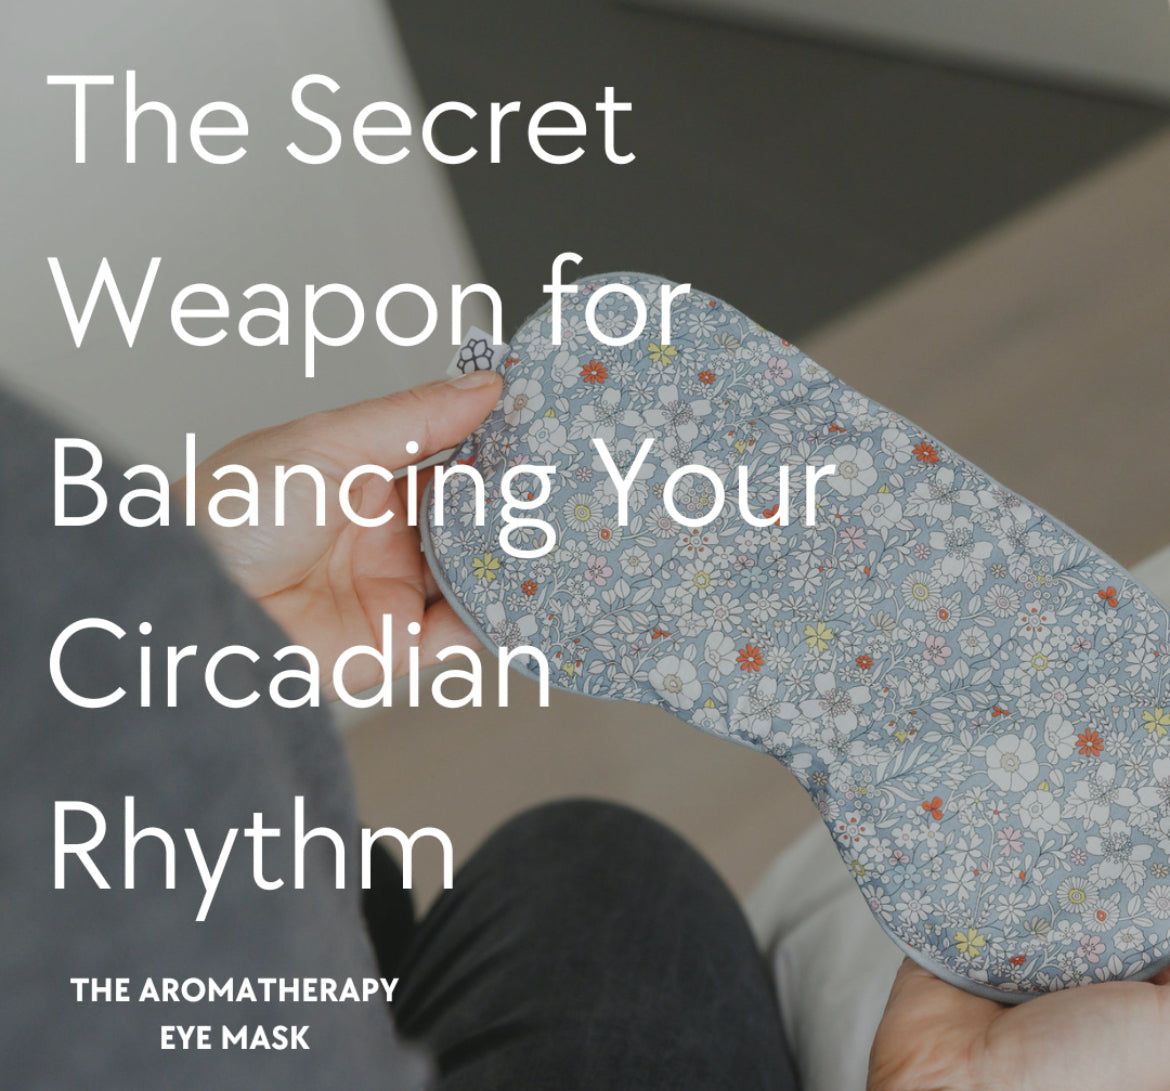 The Secret Weapon for Balancing Your Circadian Rhythm: The Eye Mask